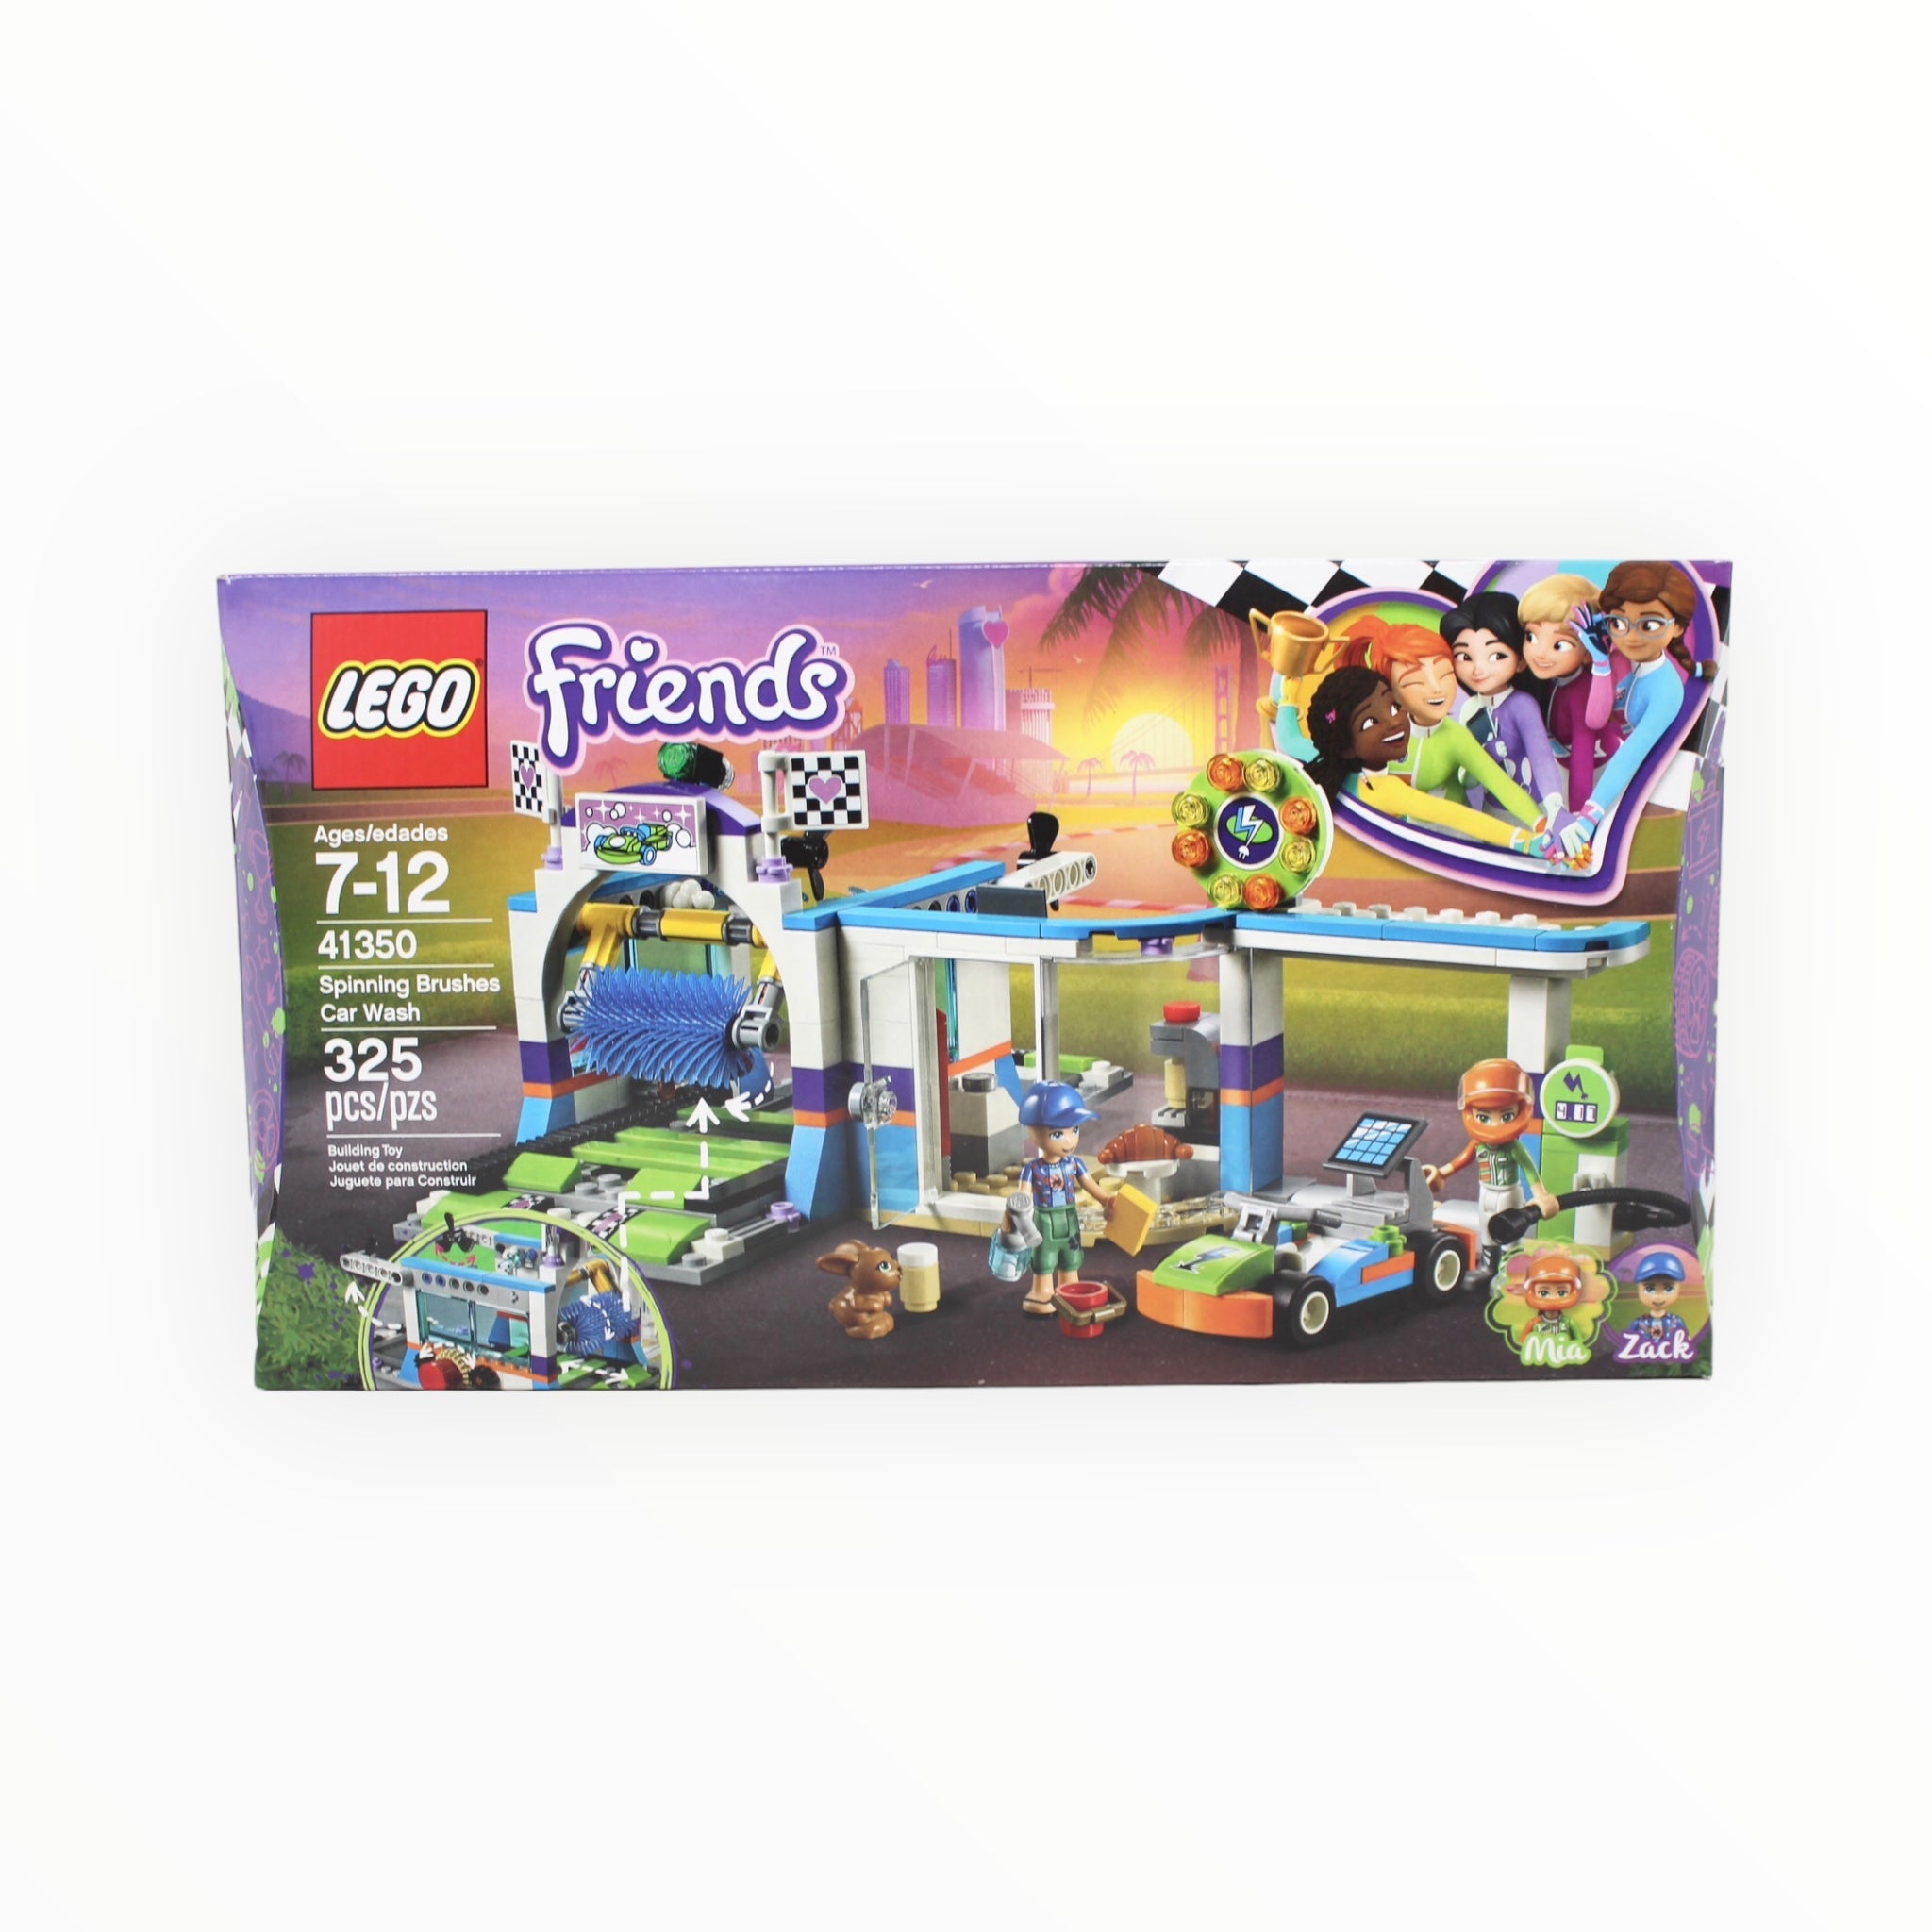 Retired Set 41350 Friends Spinning Brushes Car Wash